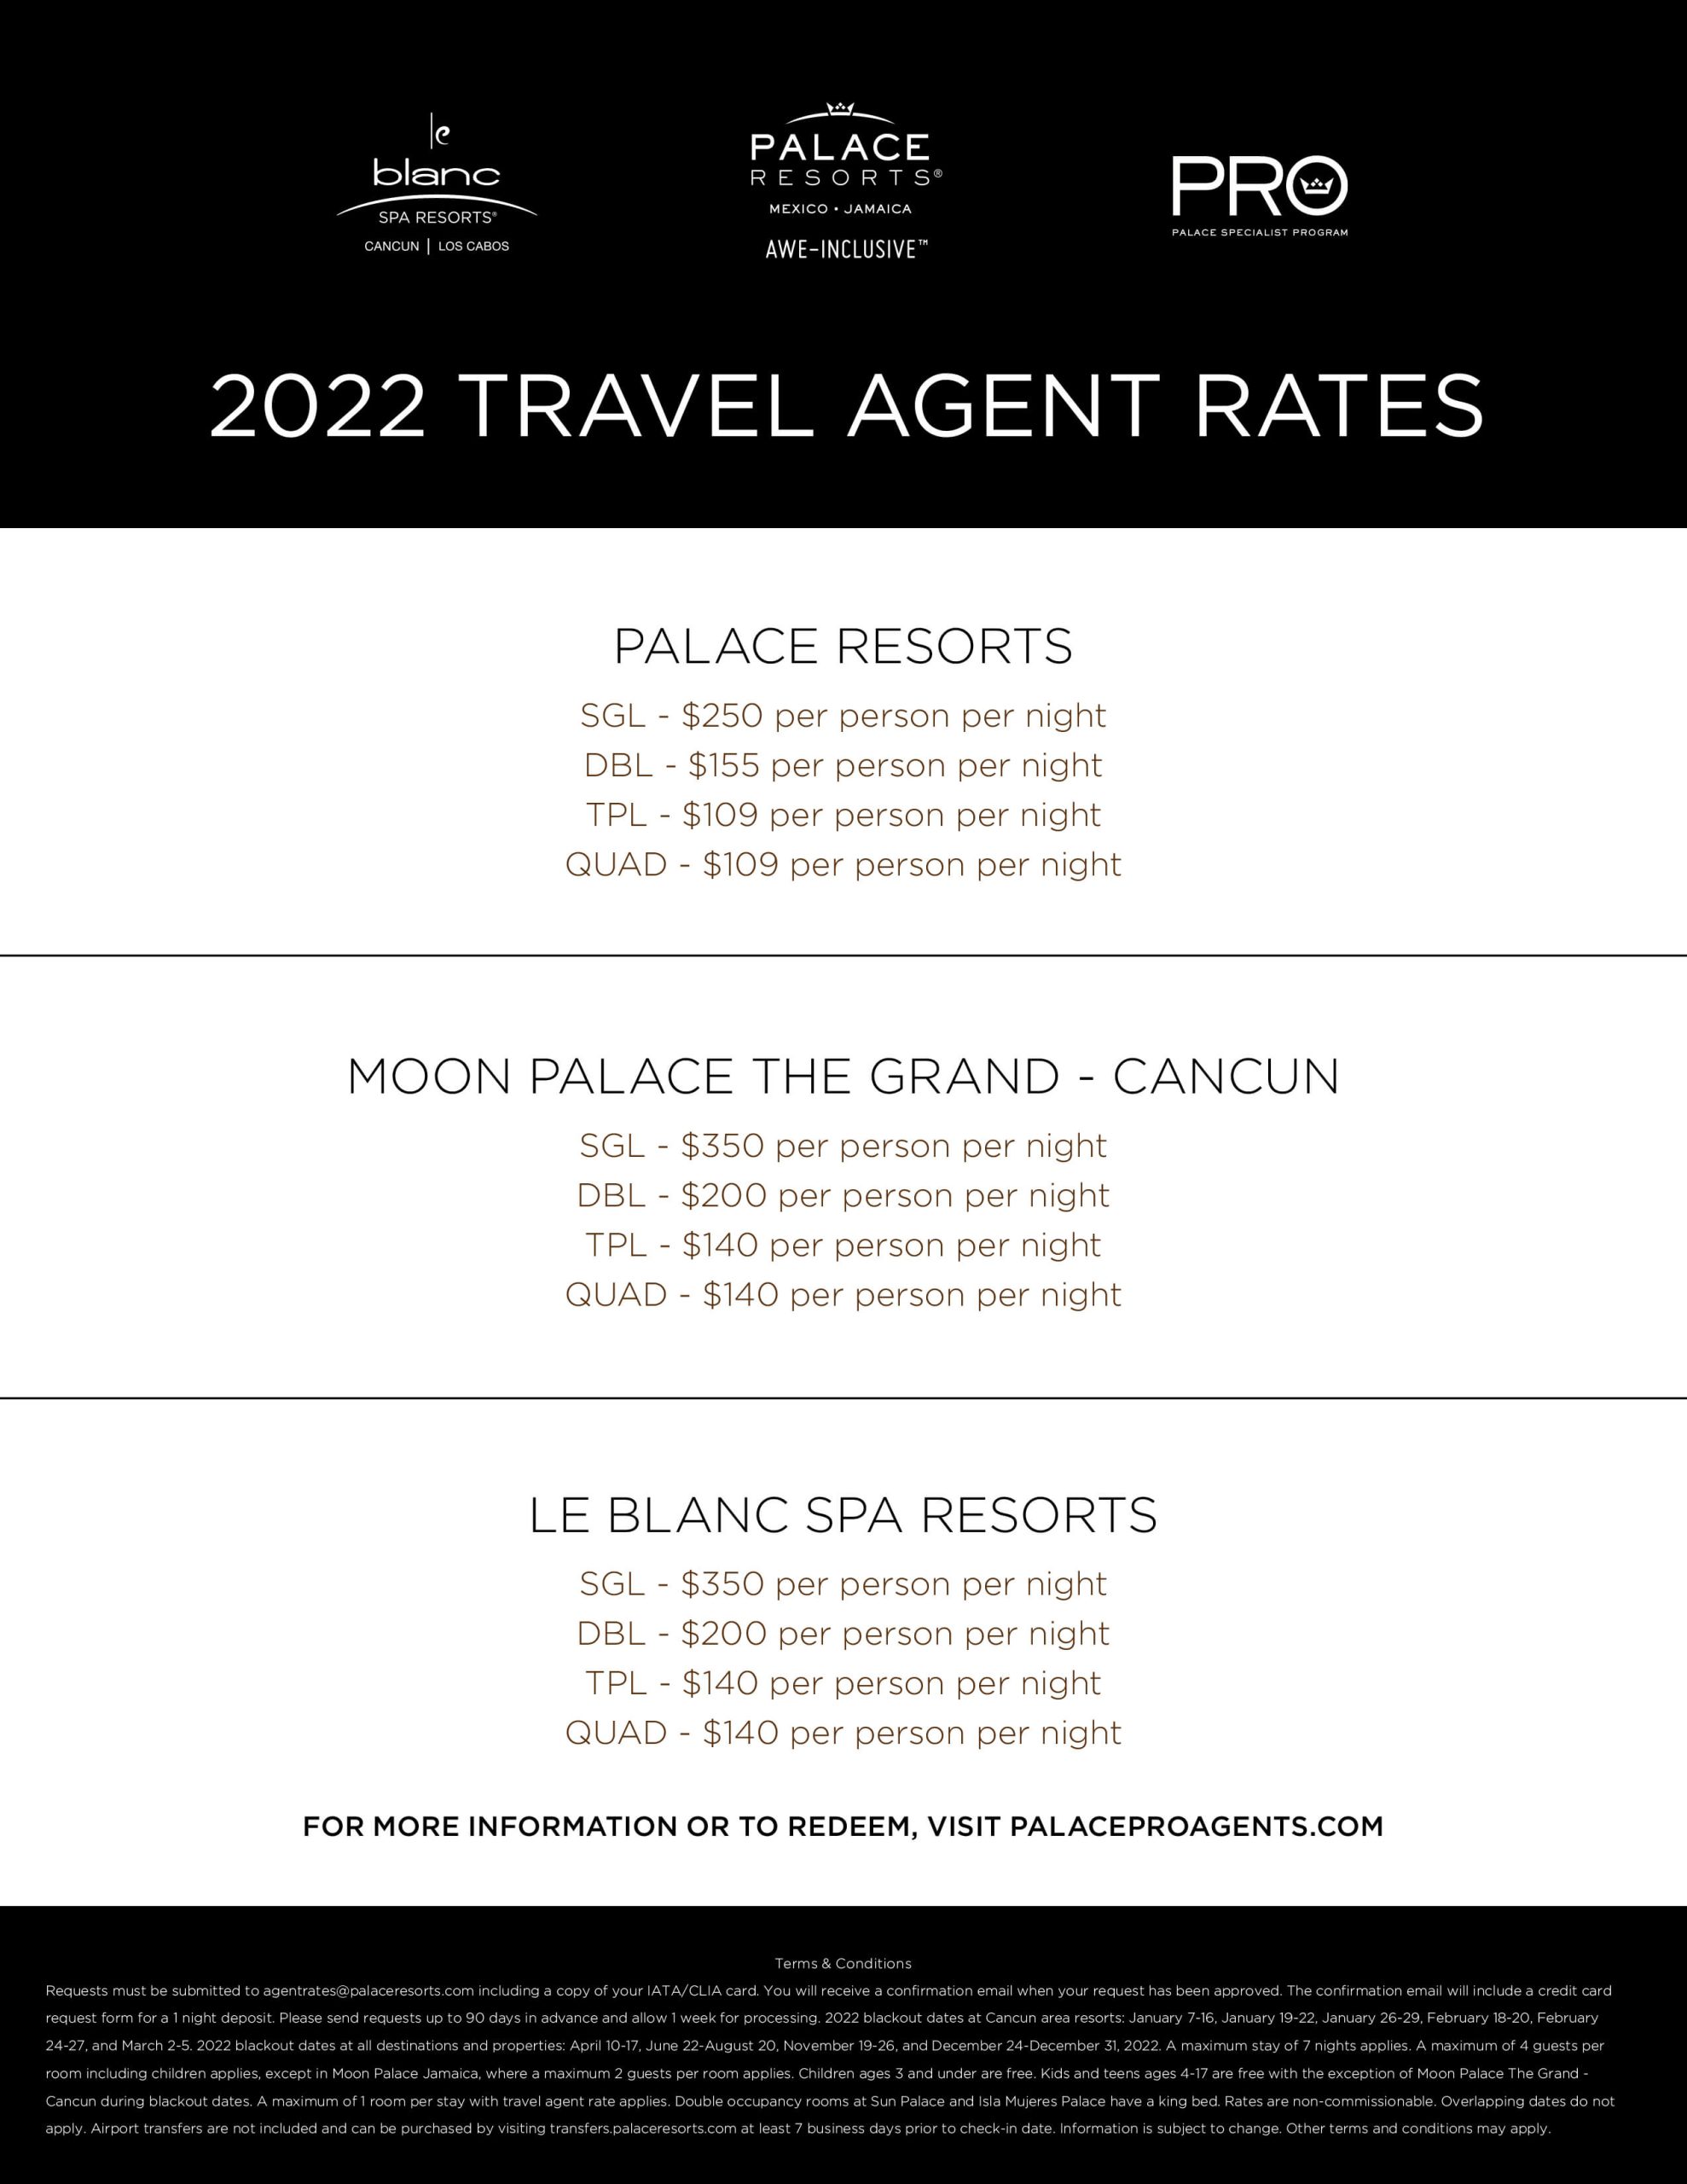 palace hotels travel agent rates